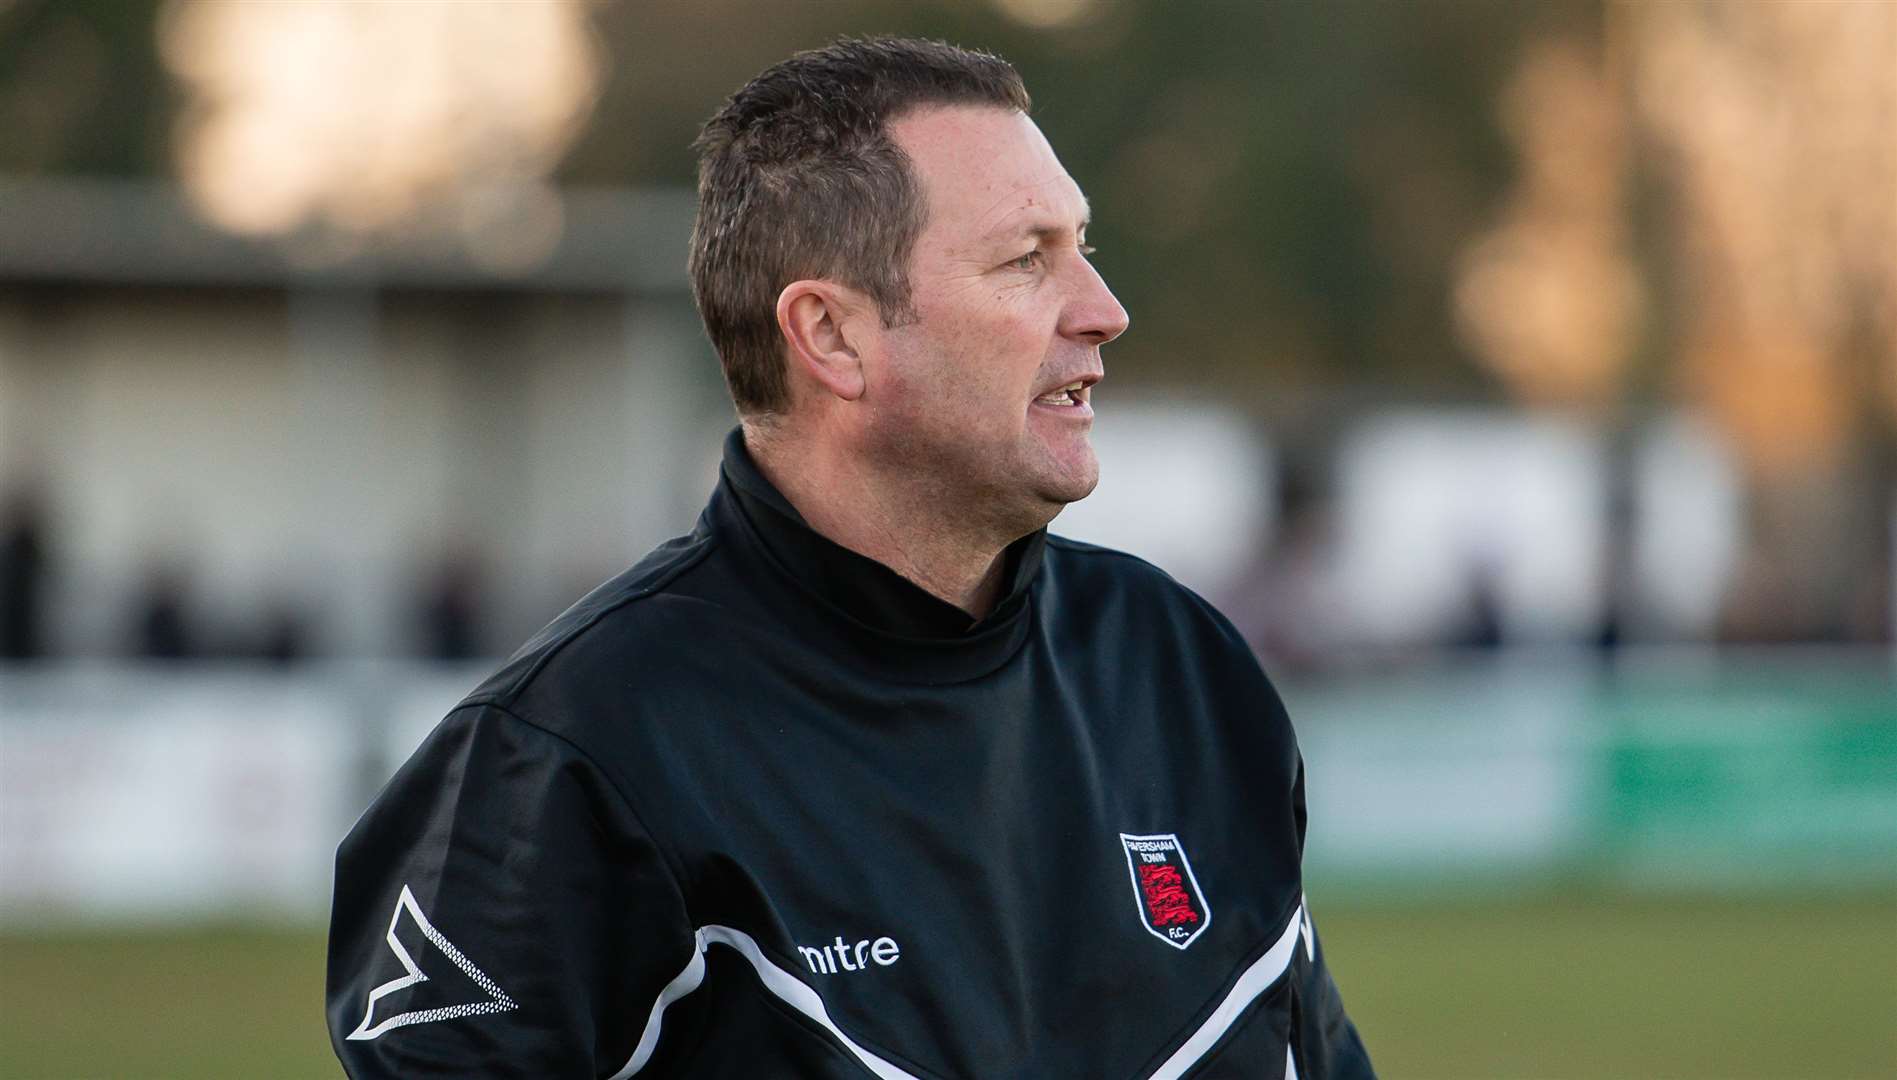 Joint-manager of Faversham Phil Miles